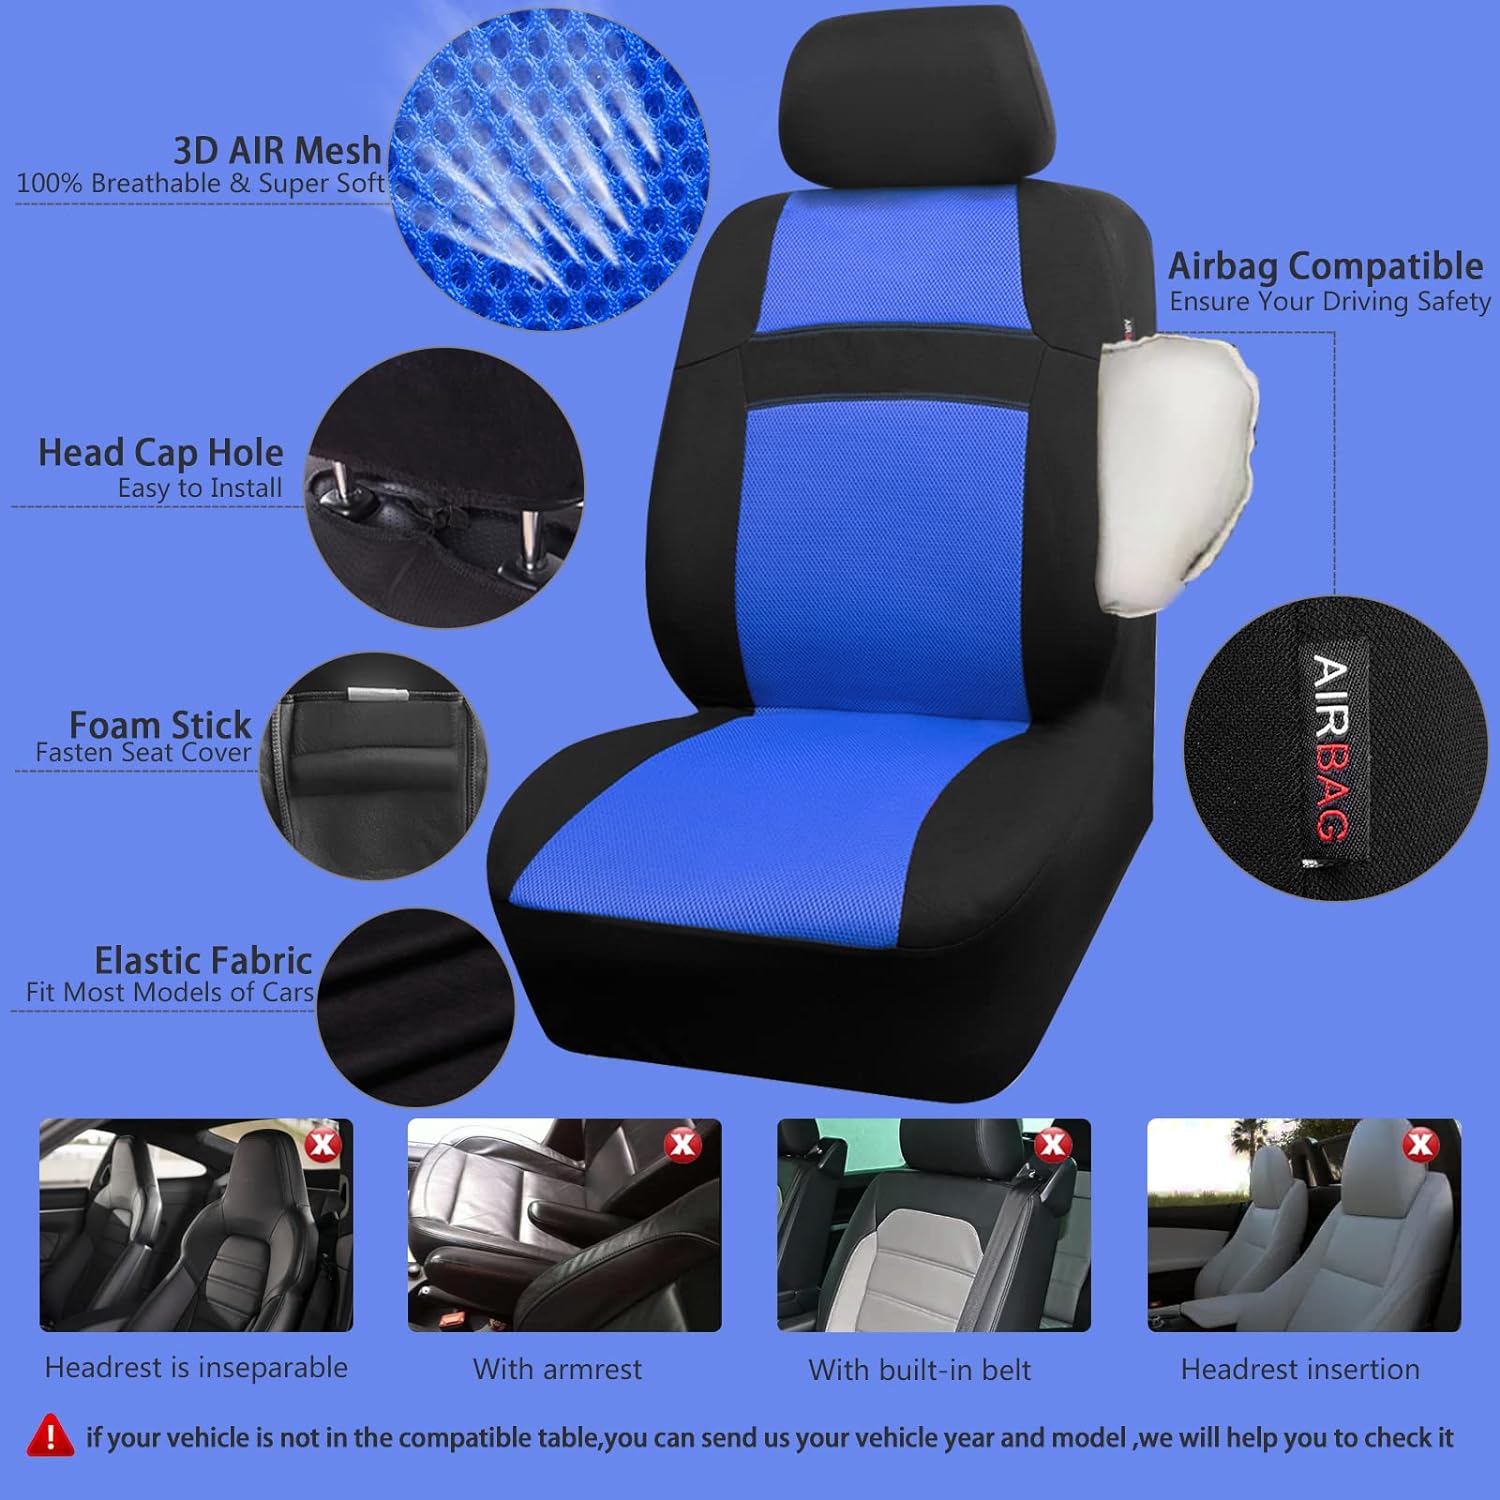 CAR PASS Line Rider Microfiber Leather Sporty 14.5-15inch Steering Wheel Cover and Car Seat Covers Front Seats Only Universal Fit SUV,Vans,sedans, Trucks, Automotive Interior Covers, Black and Blue